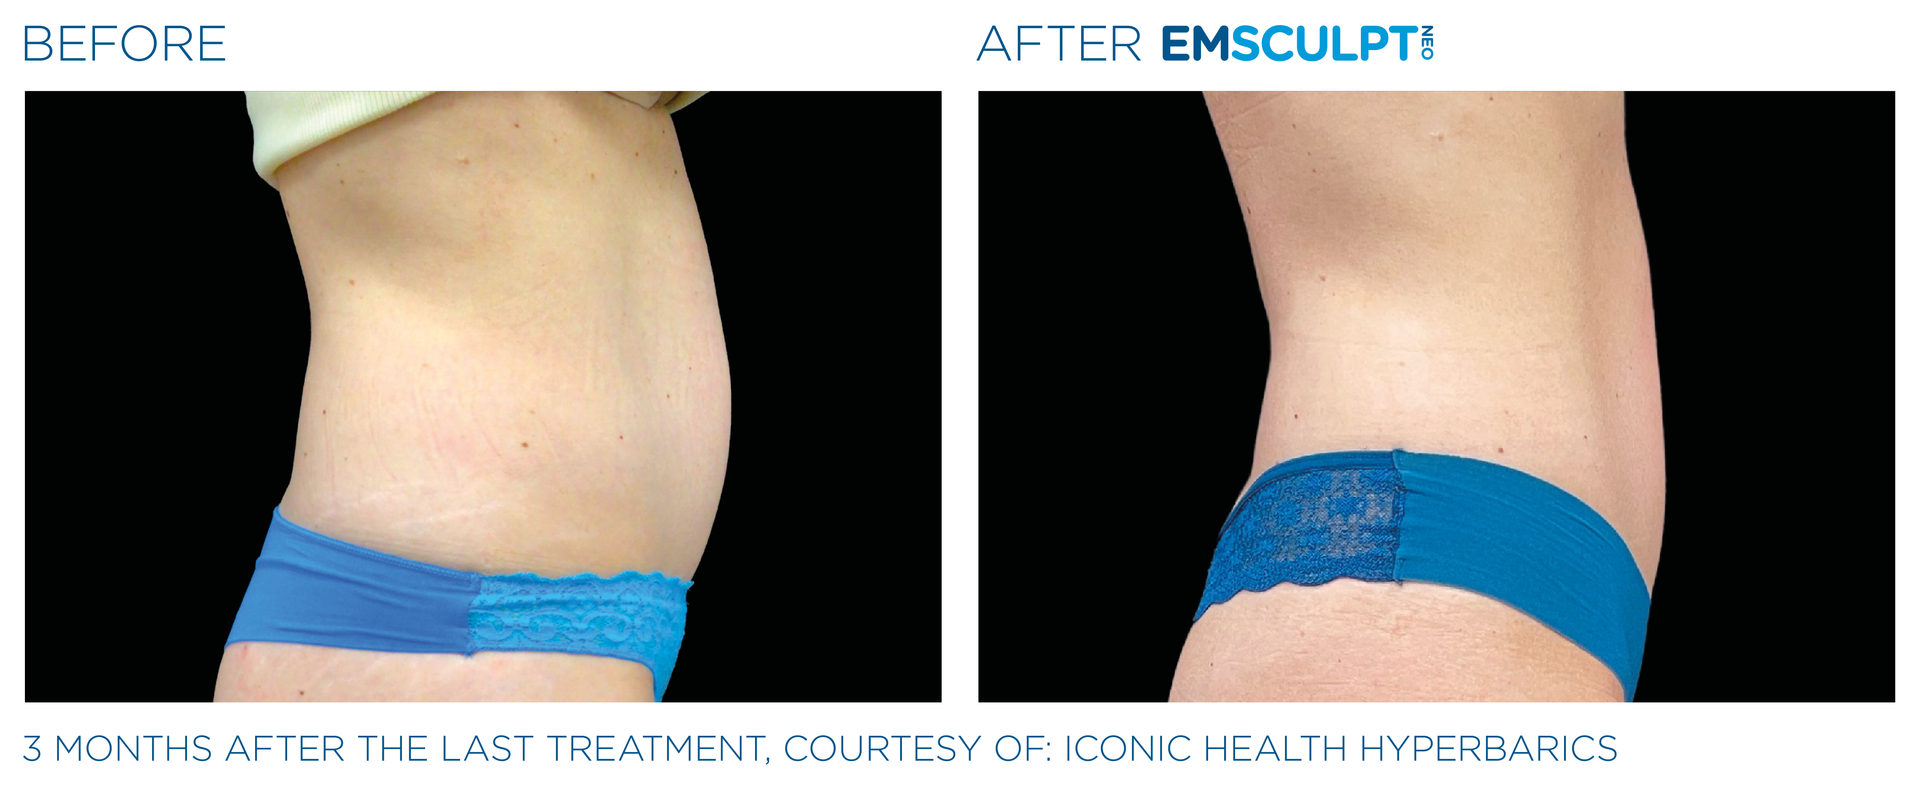 Burn fat build muscle with  Emsculpt neo at Dr. Mantor's Wrinkle and Weight Solutions in Westerville, OH book your free trial today!